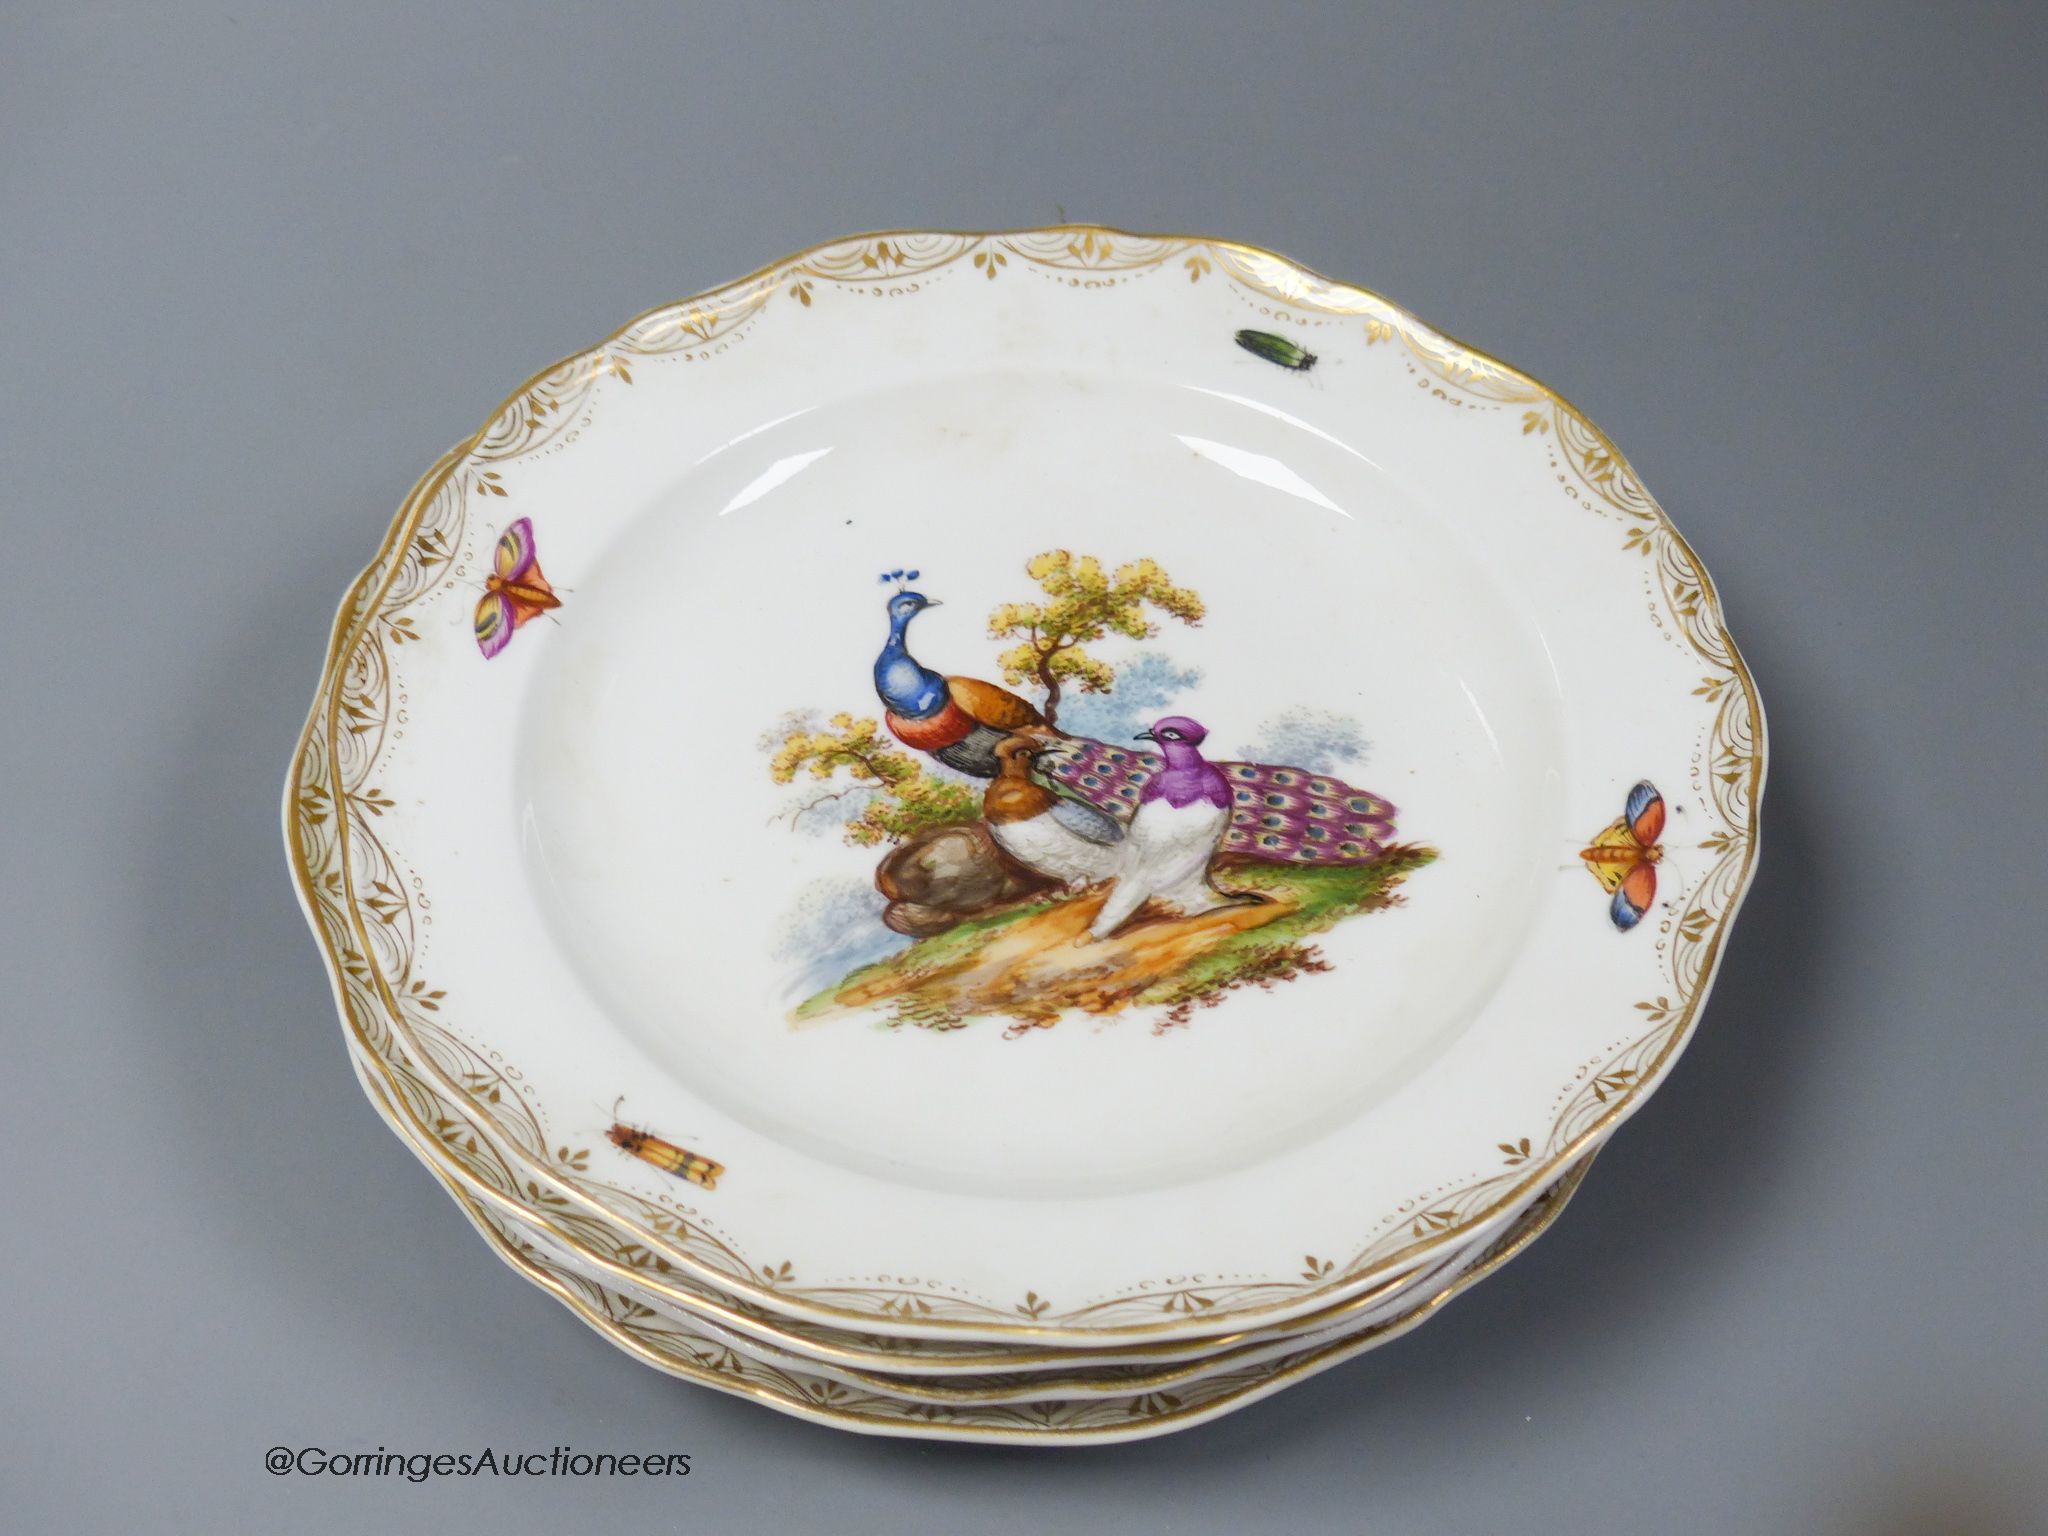 A set of six Meissen dessert dishes, painted with birds,factory seconds, 25.5cm diameter - Image 3 of 8